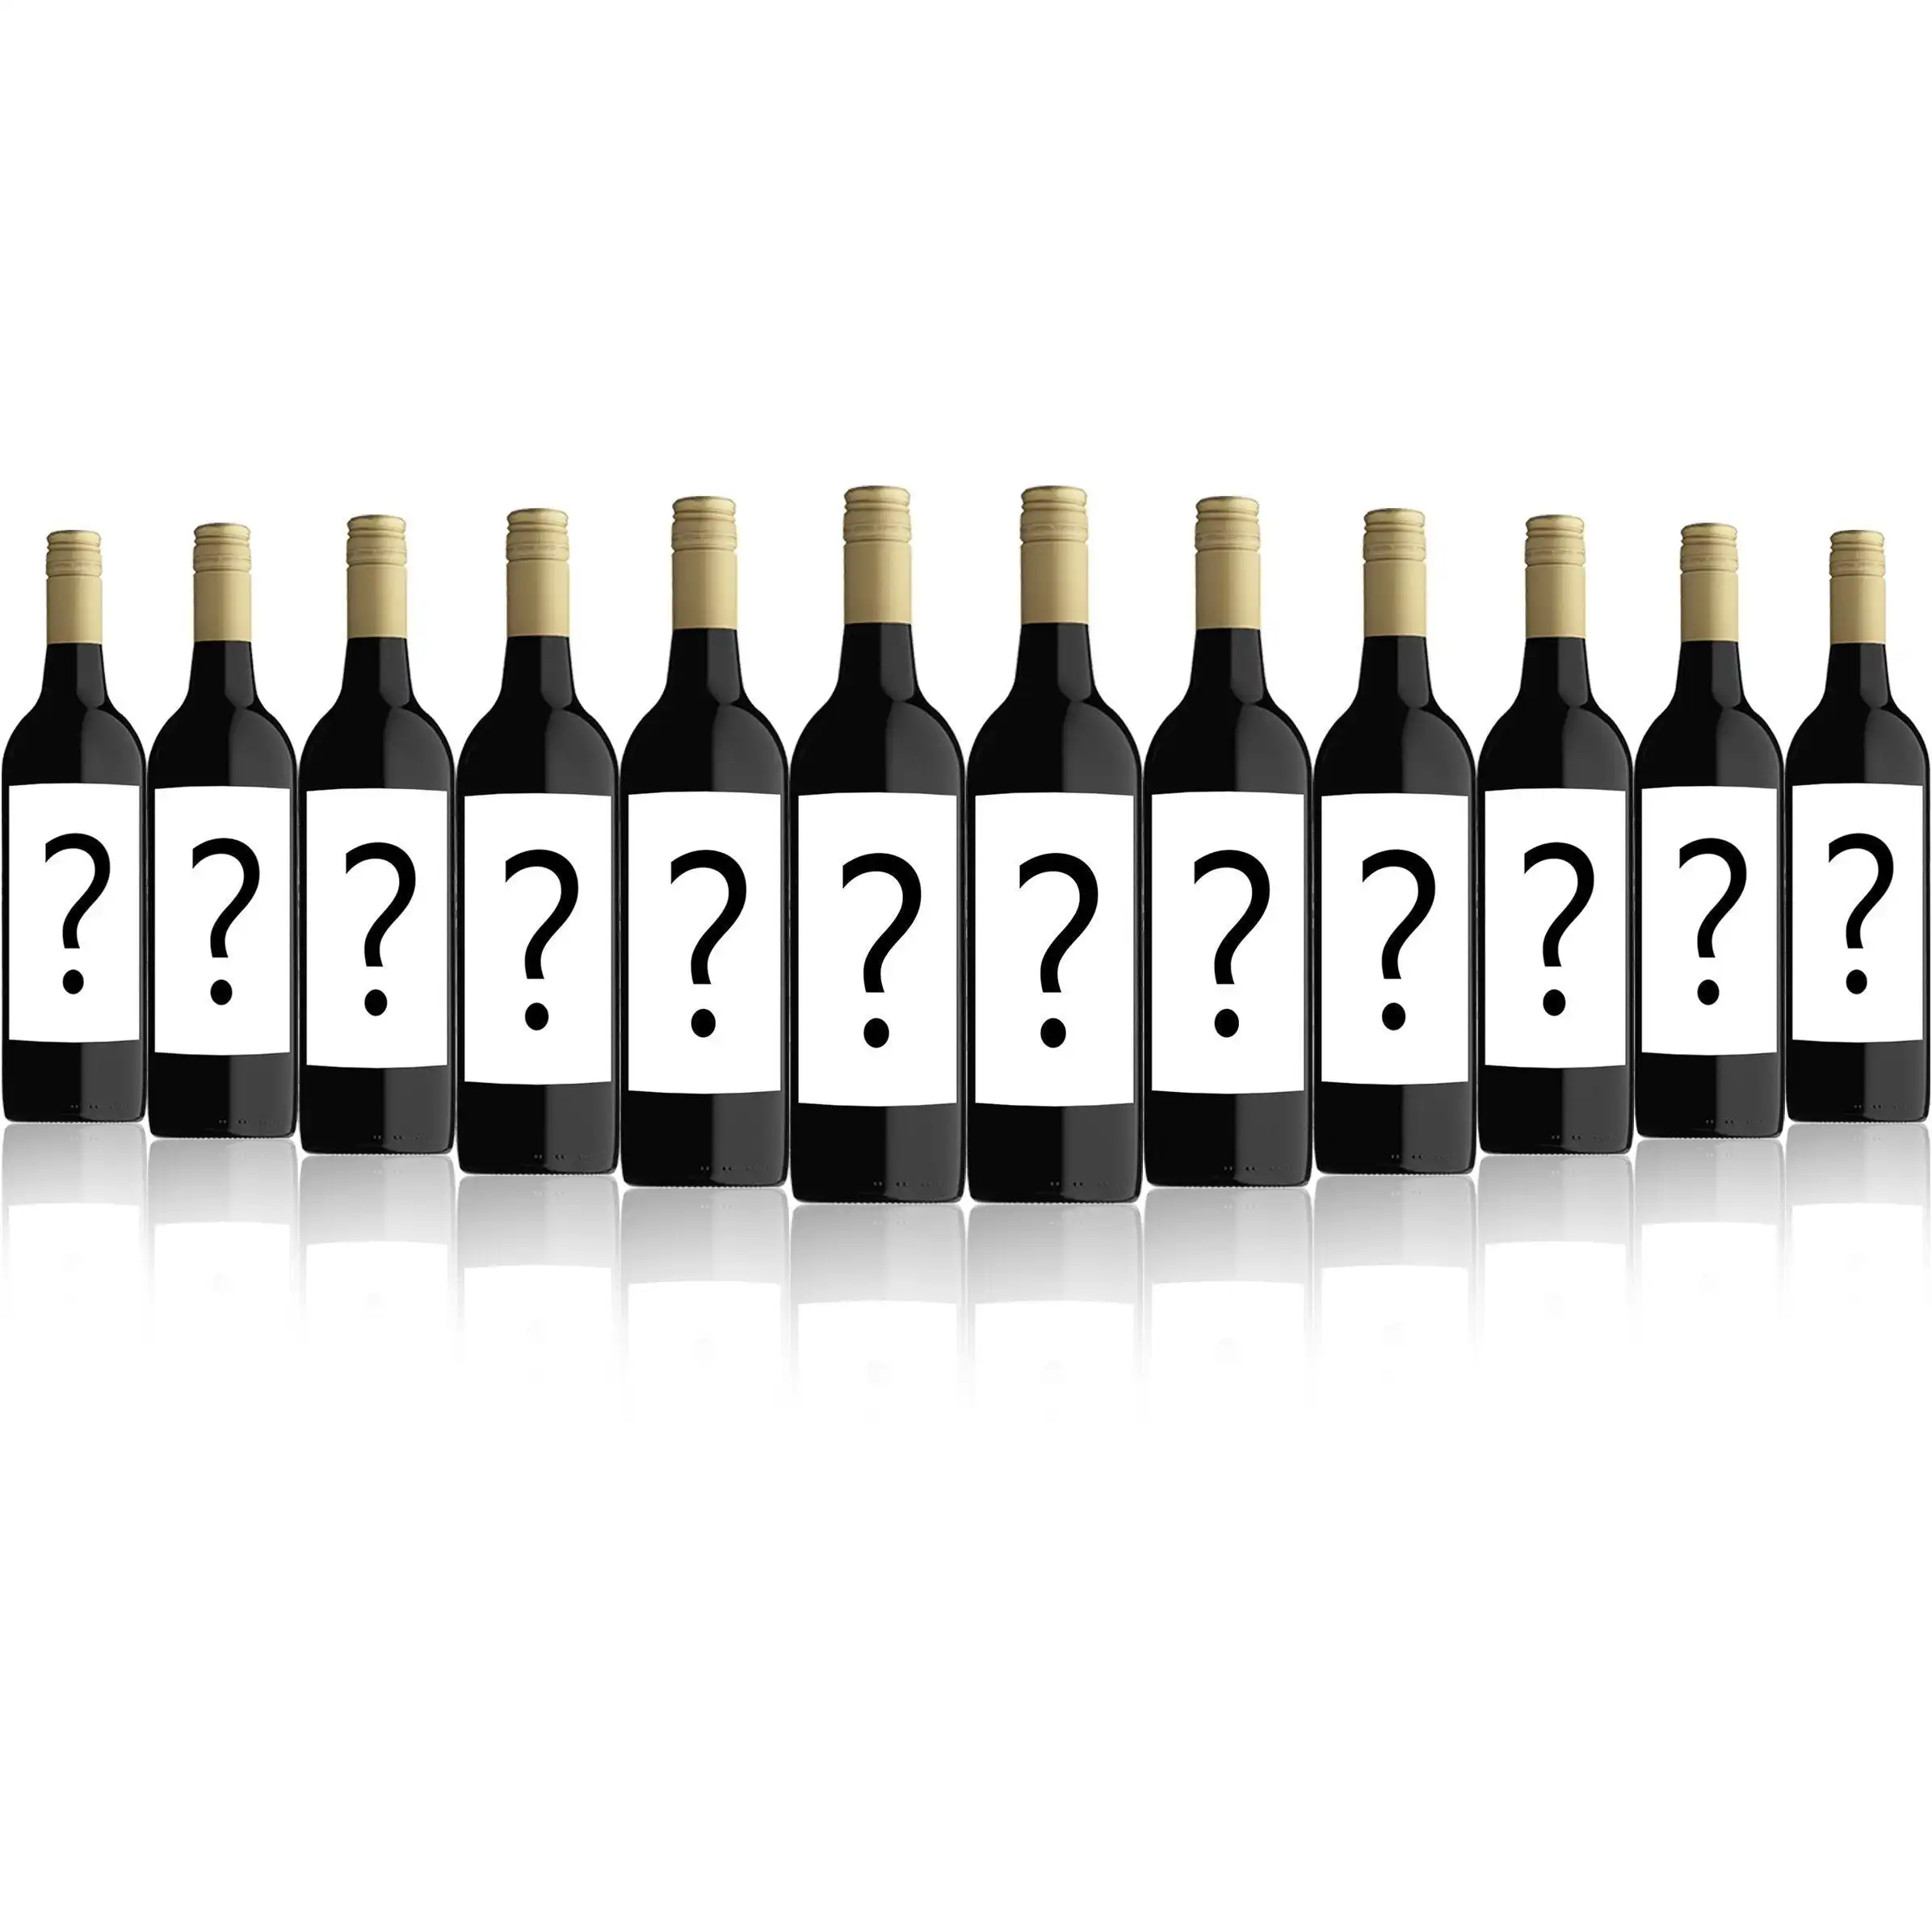 Warehouse Clearance Mystery Mixed Red Wine Dozen (12 bottles)